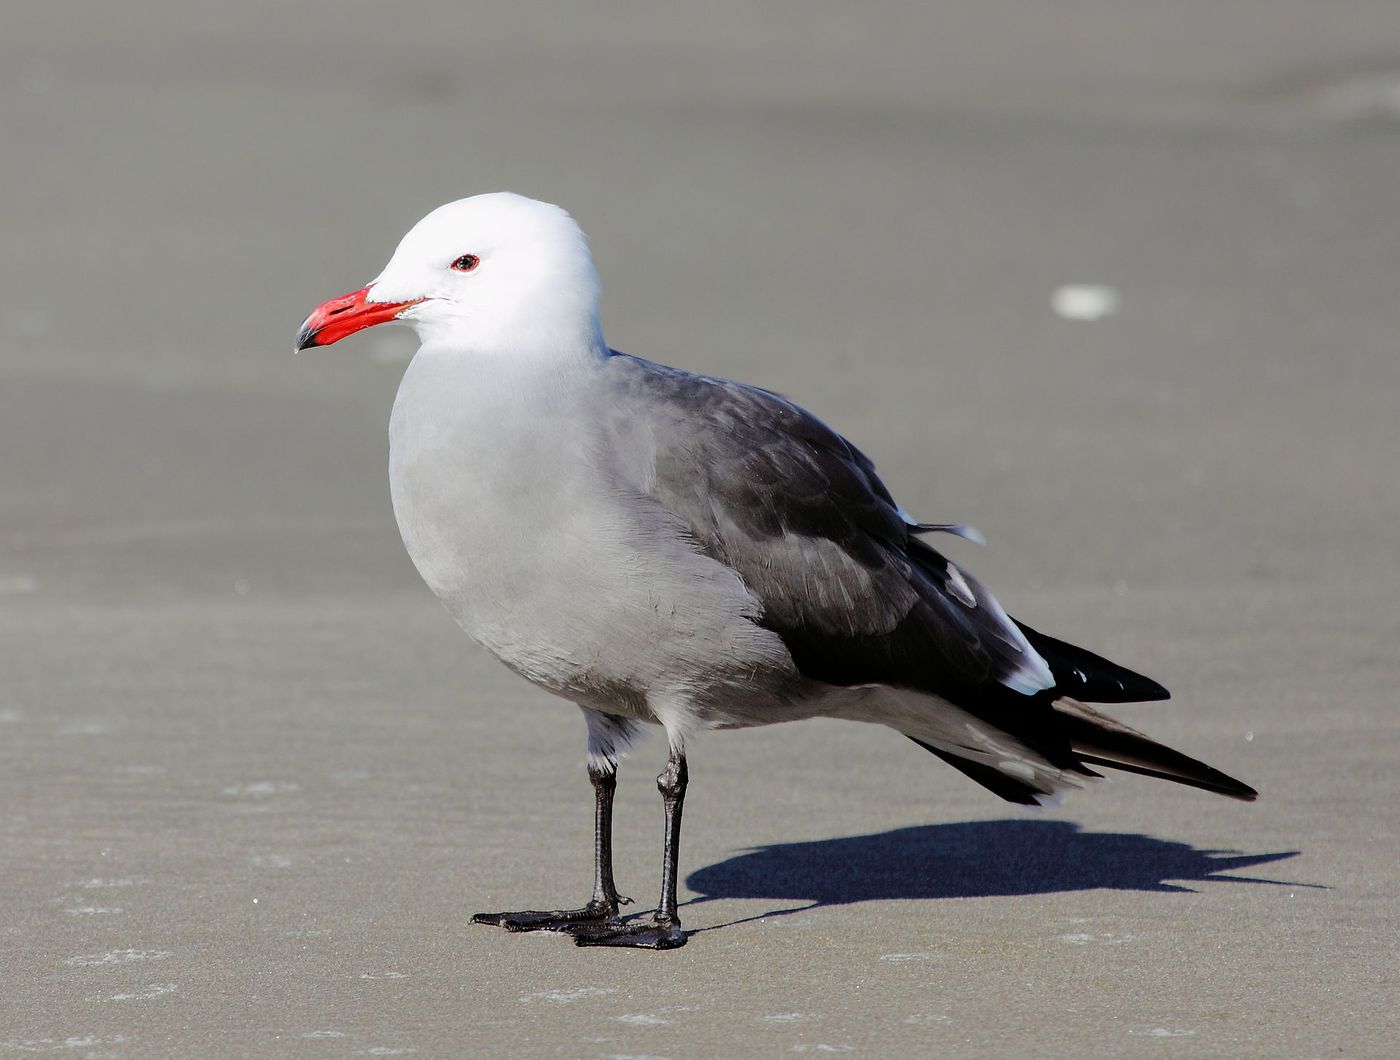 Heermann's Gull is a type of seabird used in this study.